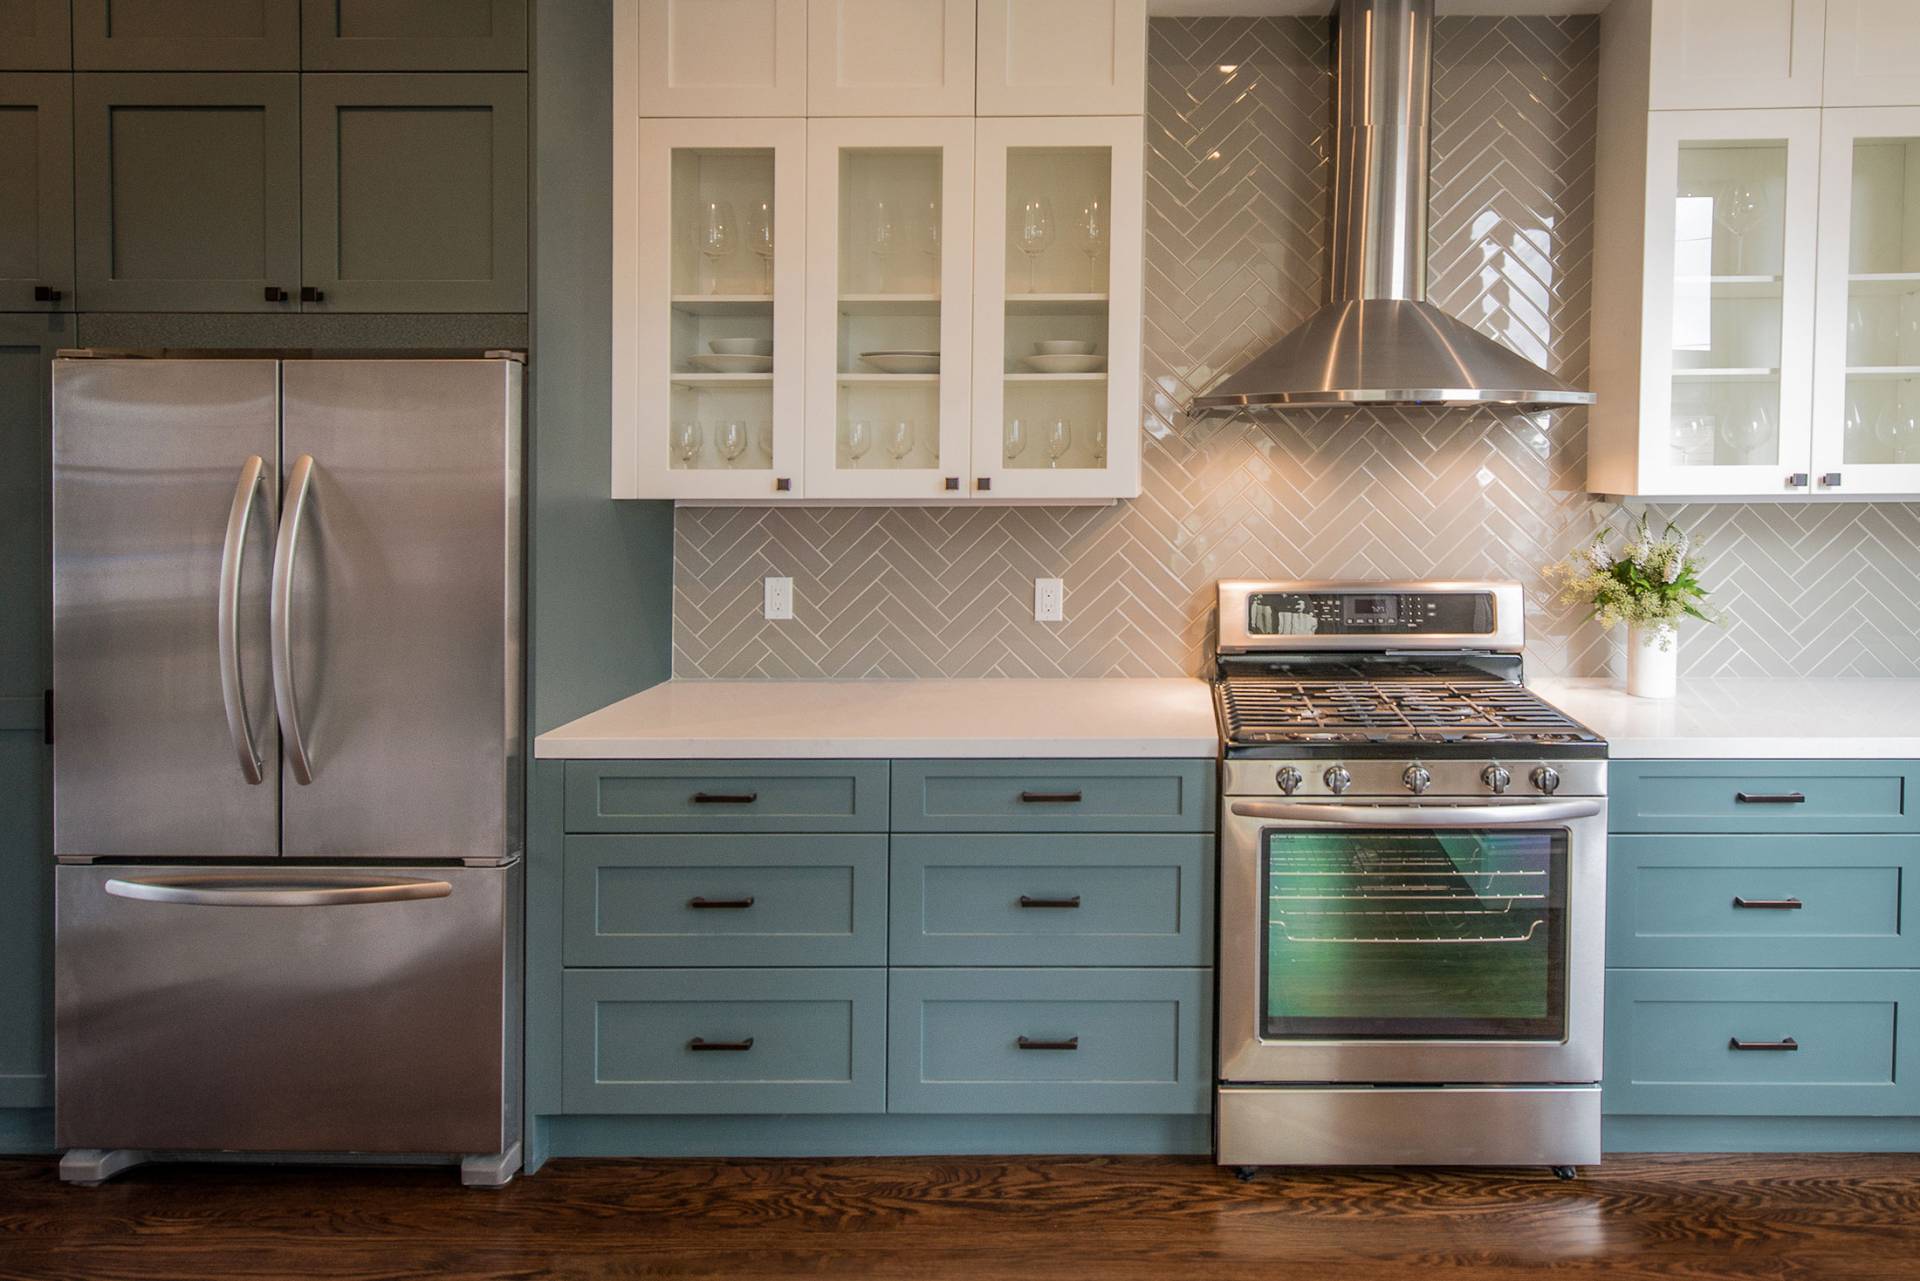  Colors That Bring Out the Best in Your Kitchen